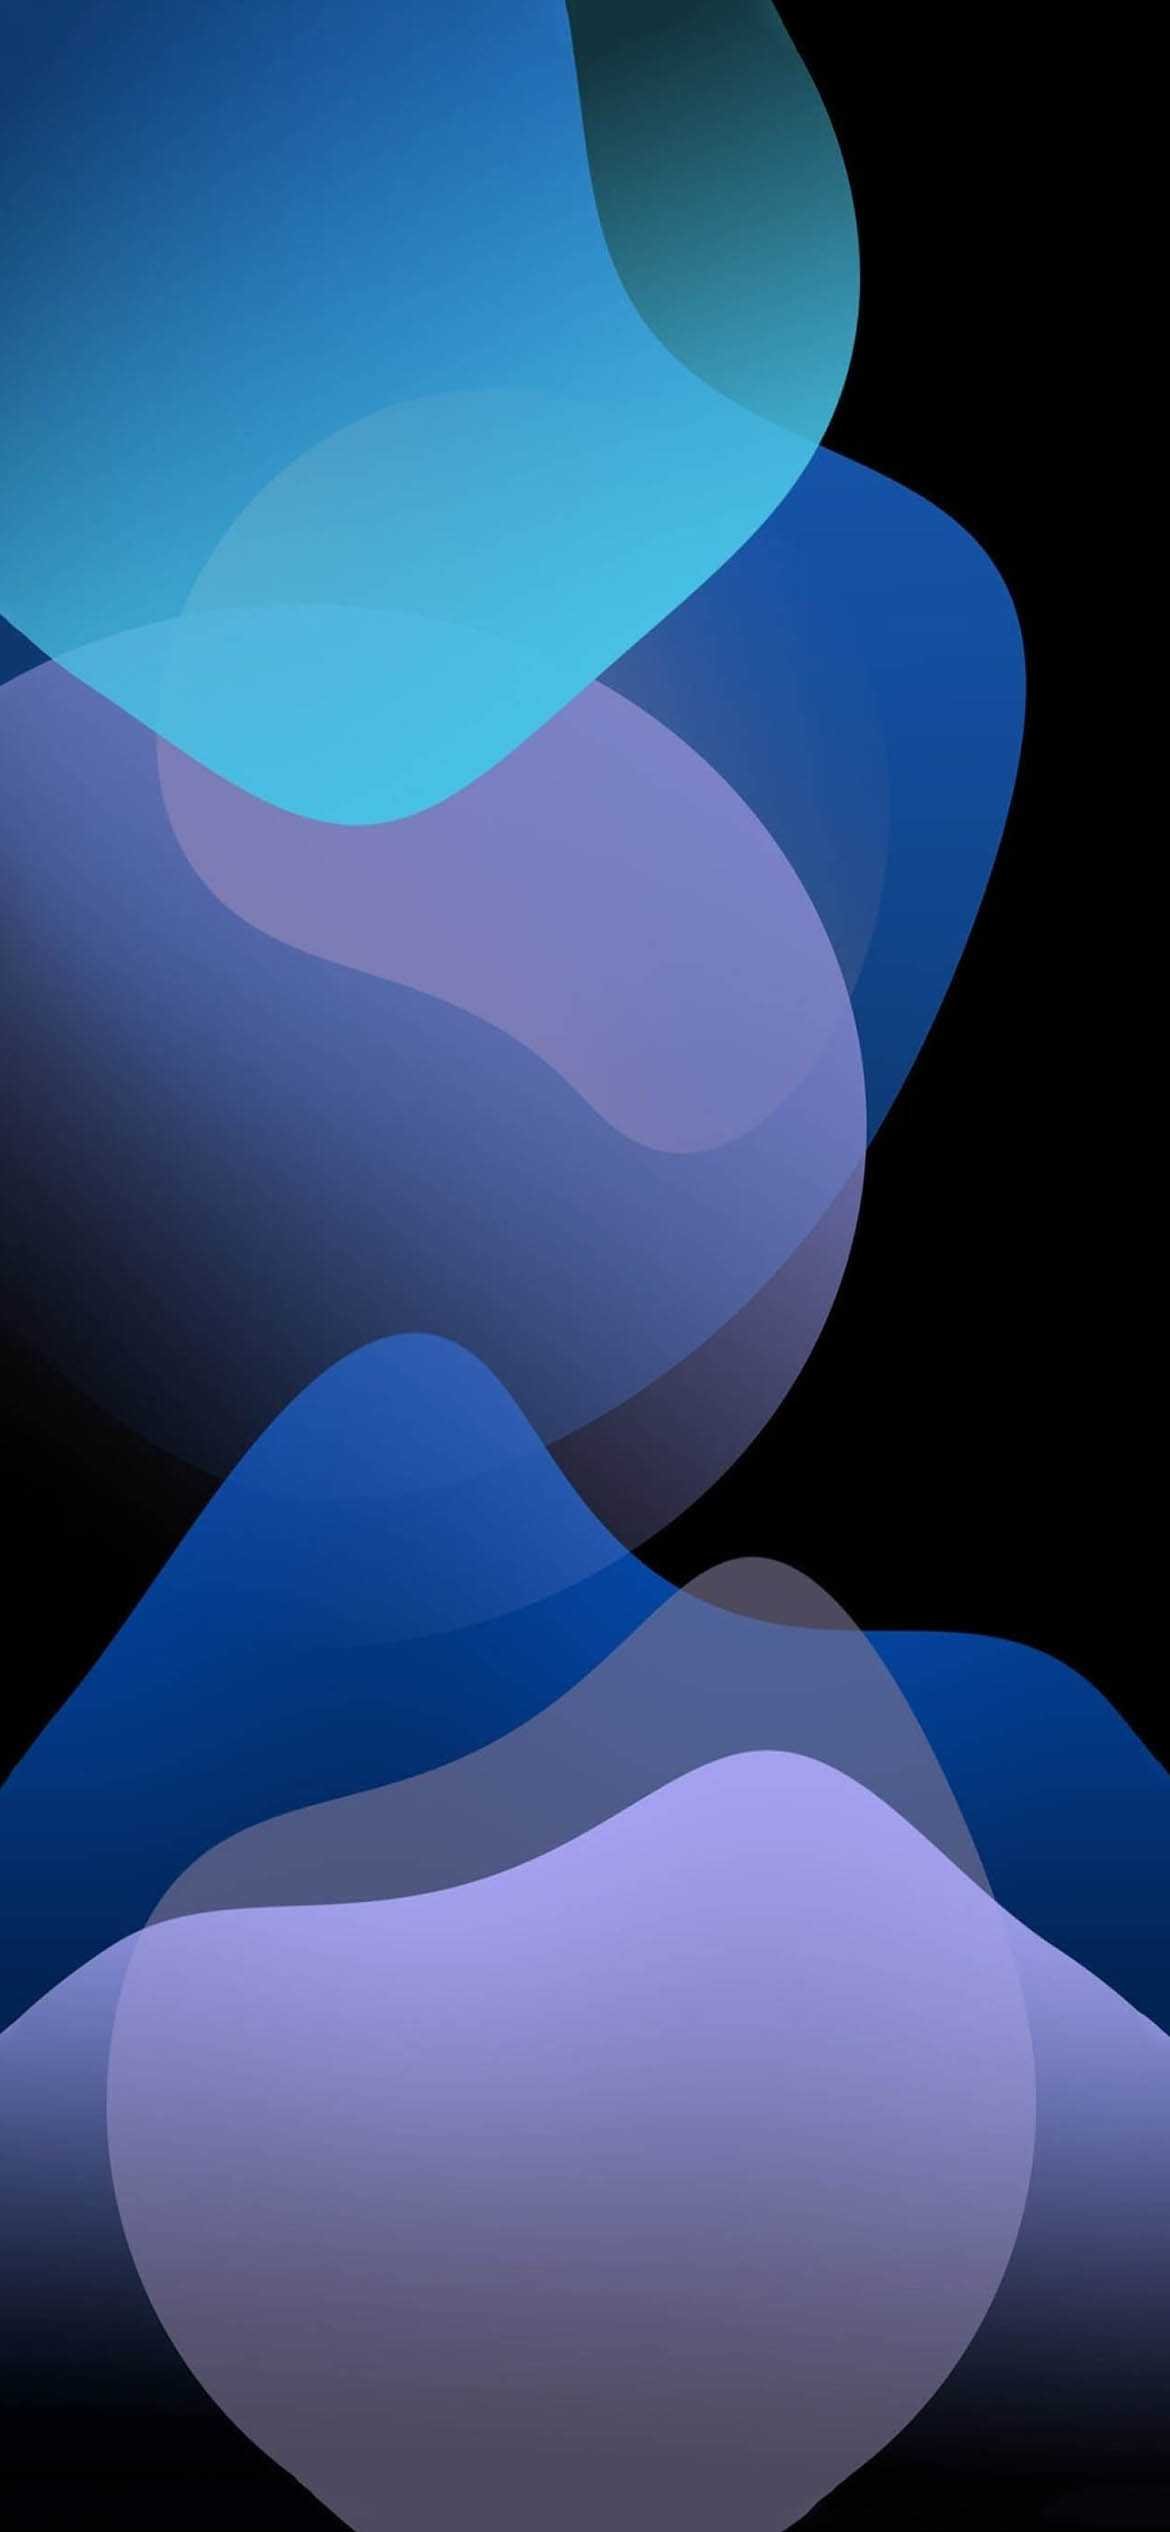 Ios 13 home screen Wallpapers Download | MobCup